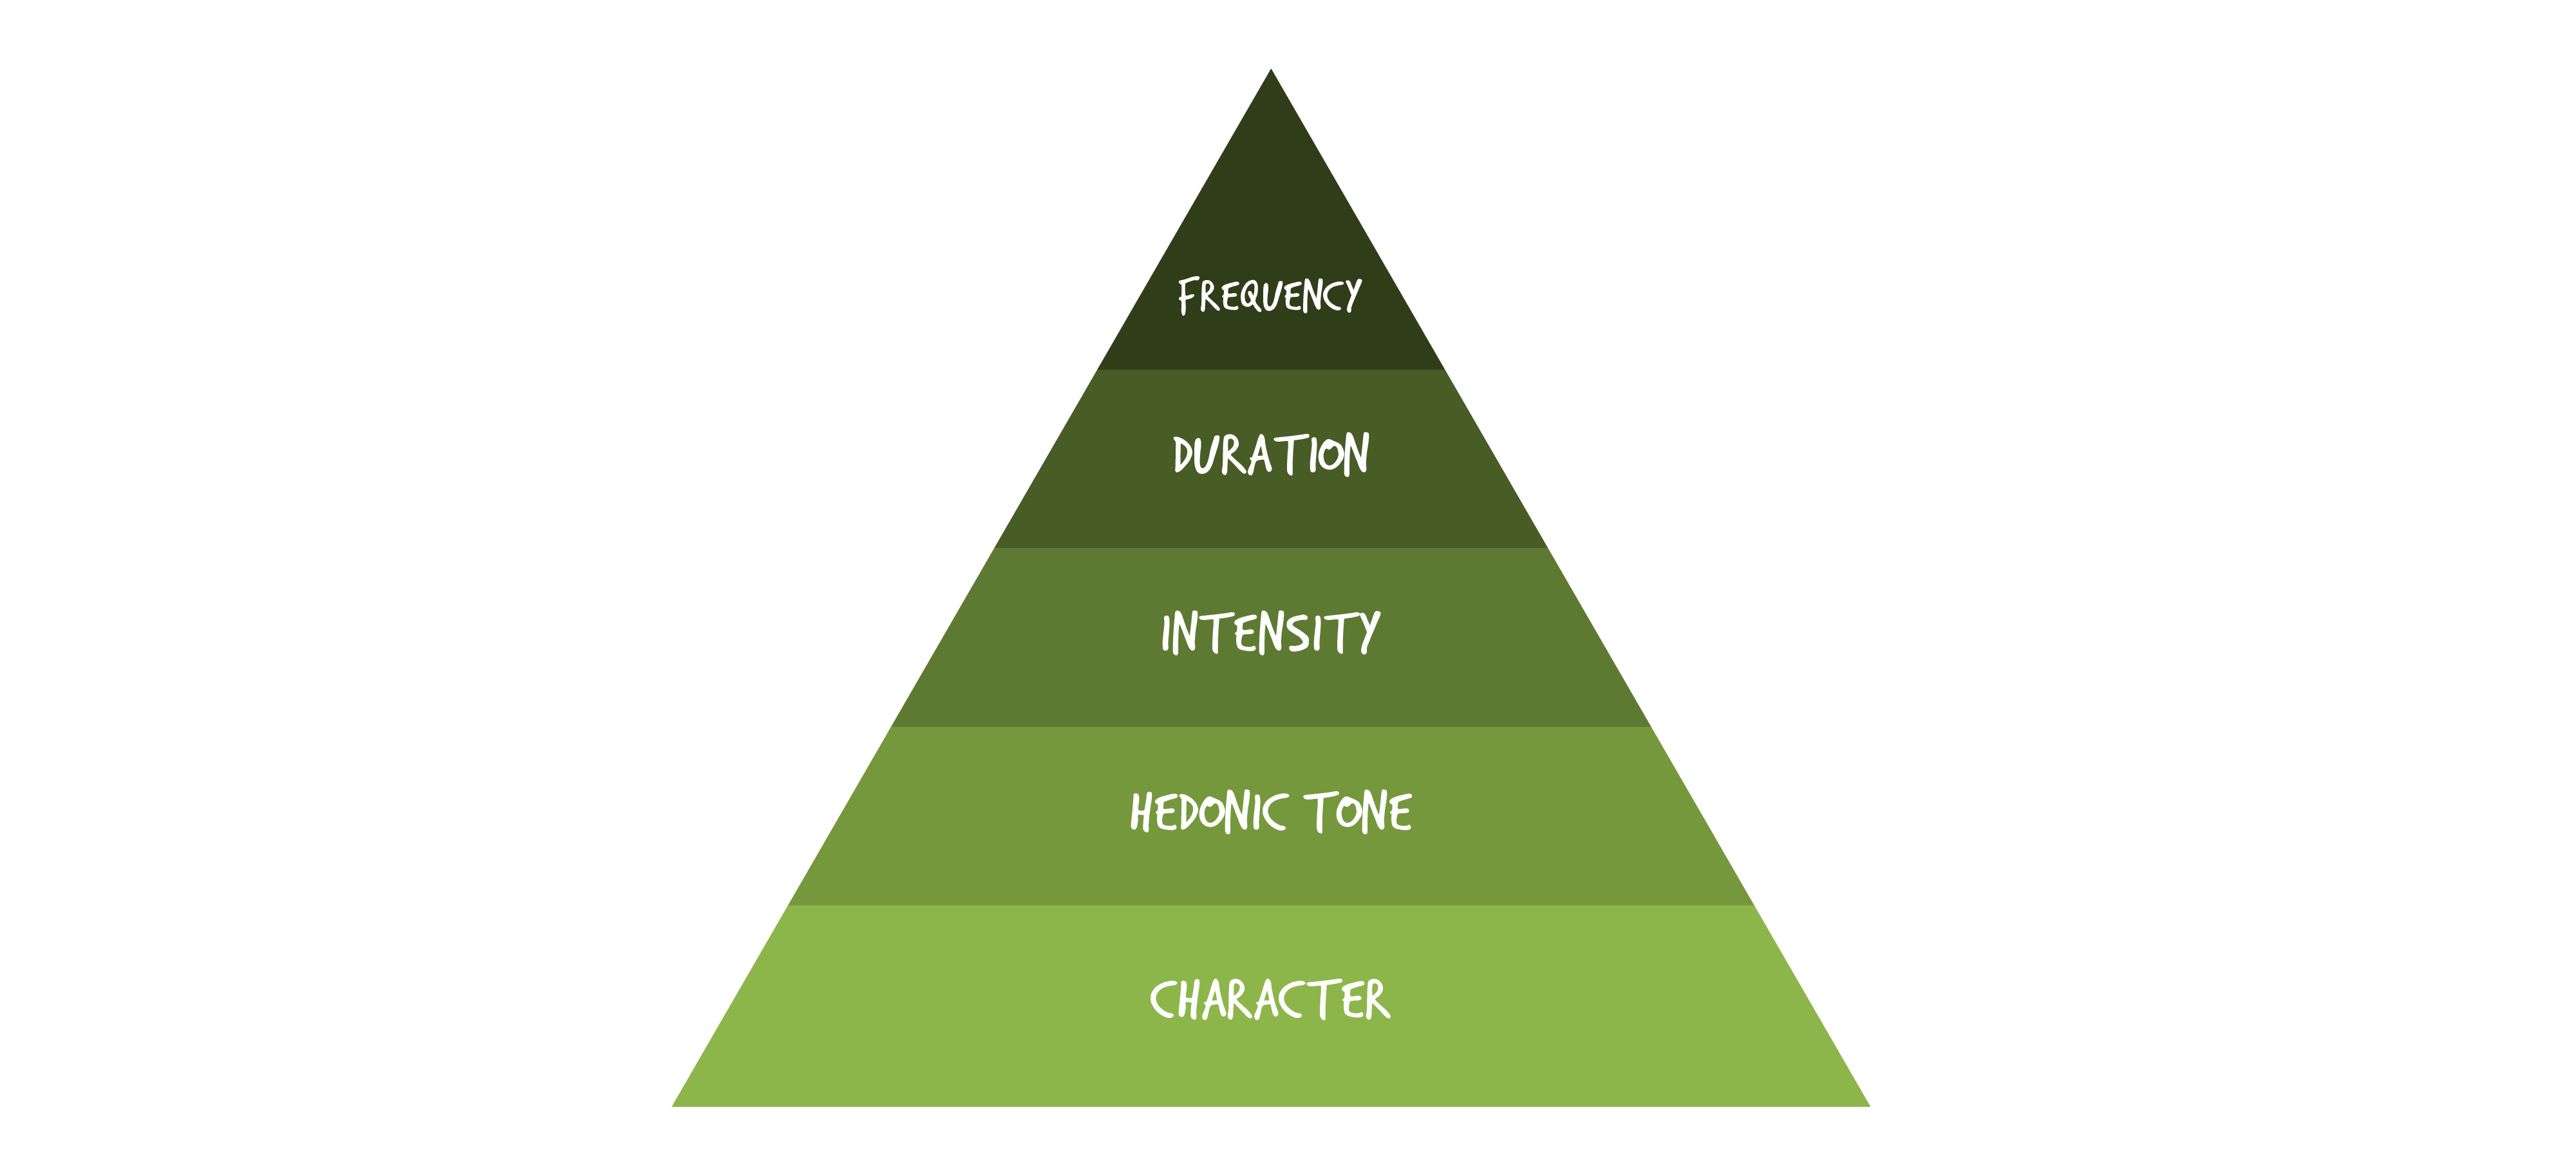 Pyramid with 5 layers going from dark to light green with text written on each layer. Top to bottom: Frequency, Duration, Intensity, Hedonic Tone, Character.